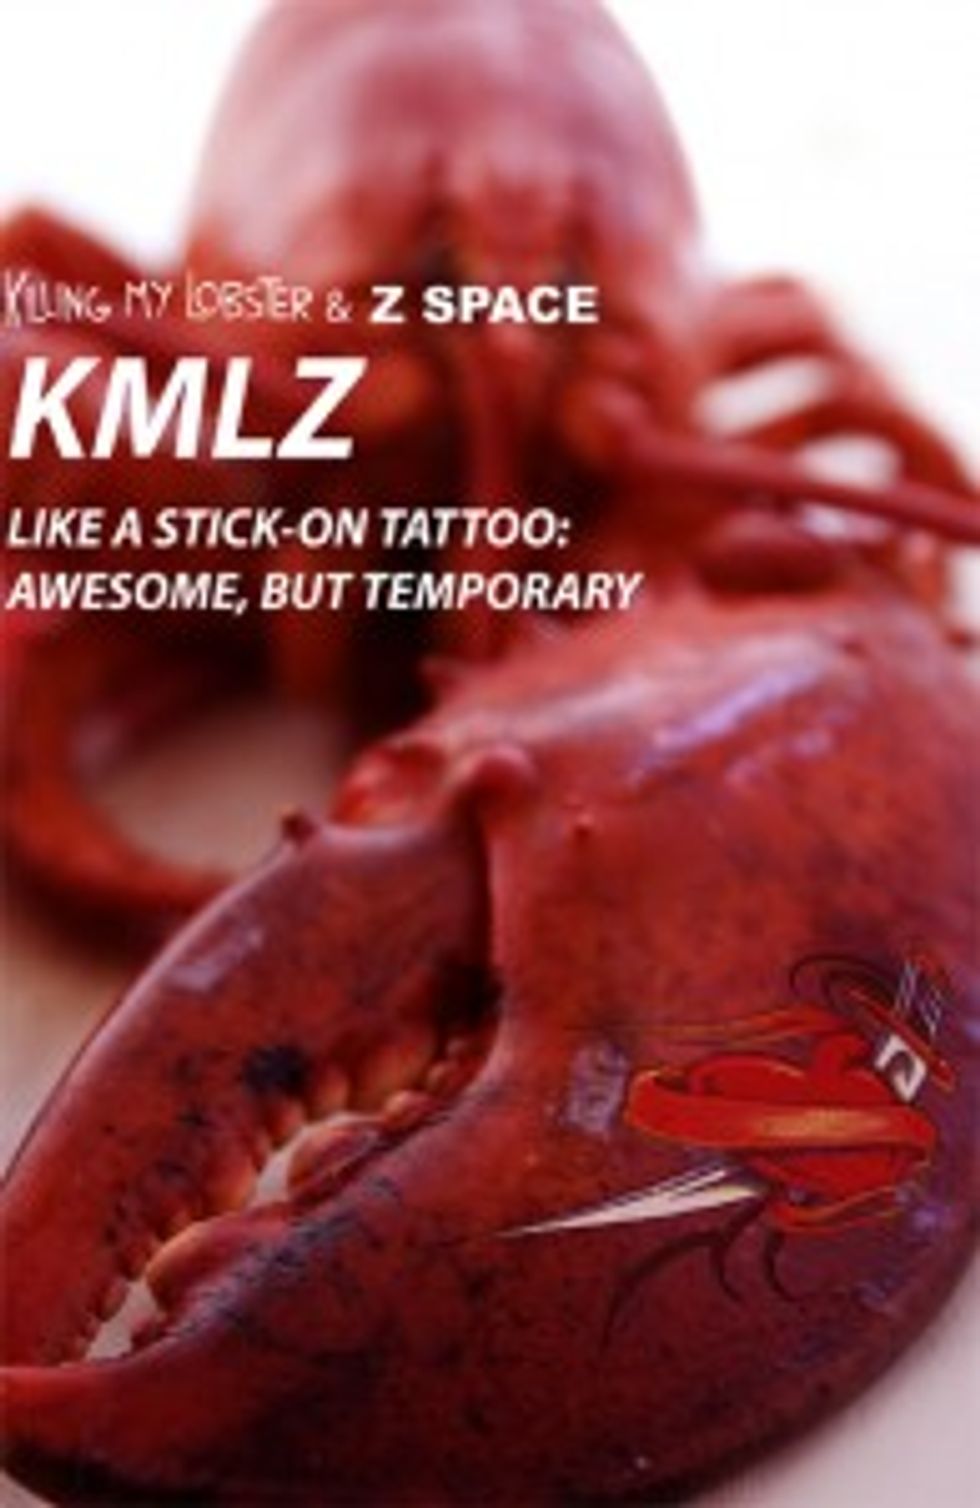 KMLZ: Killing My Lobster and Z Space in a One-Night-Only Sketch Variety Show